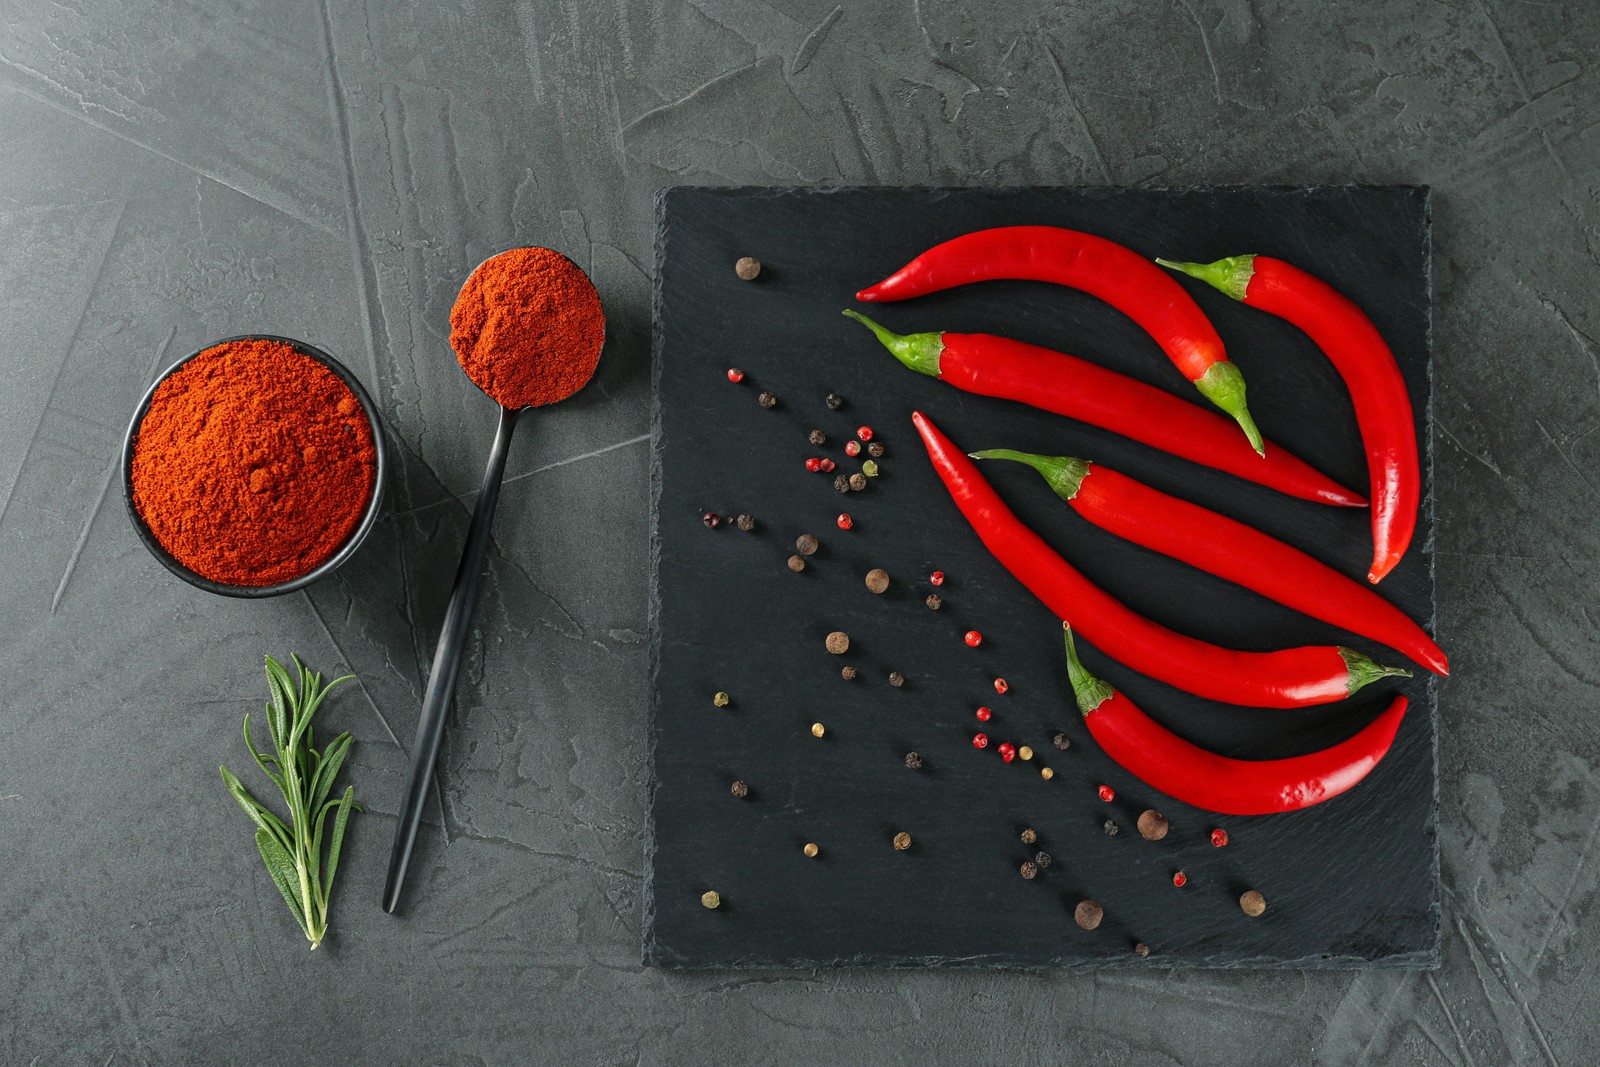 Free photo of ground red pepper and ingredients on grey table, flat lay